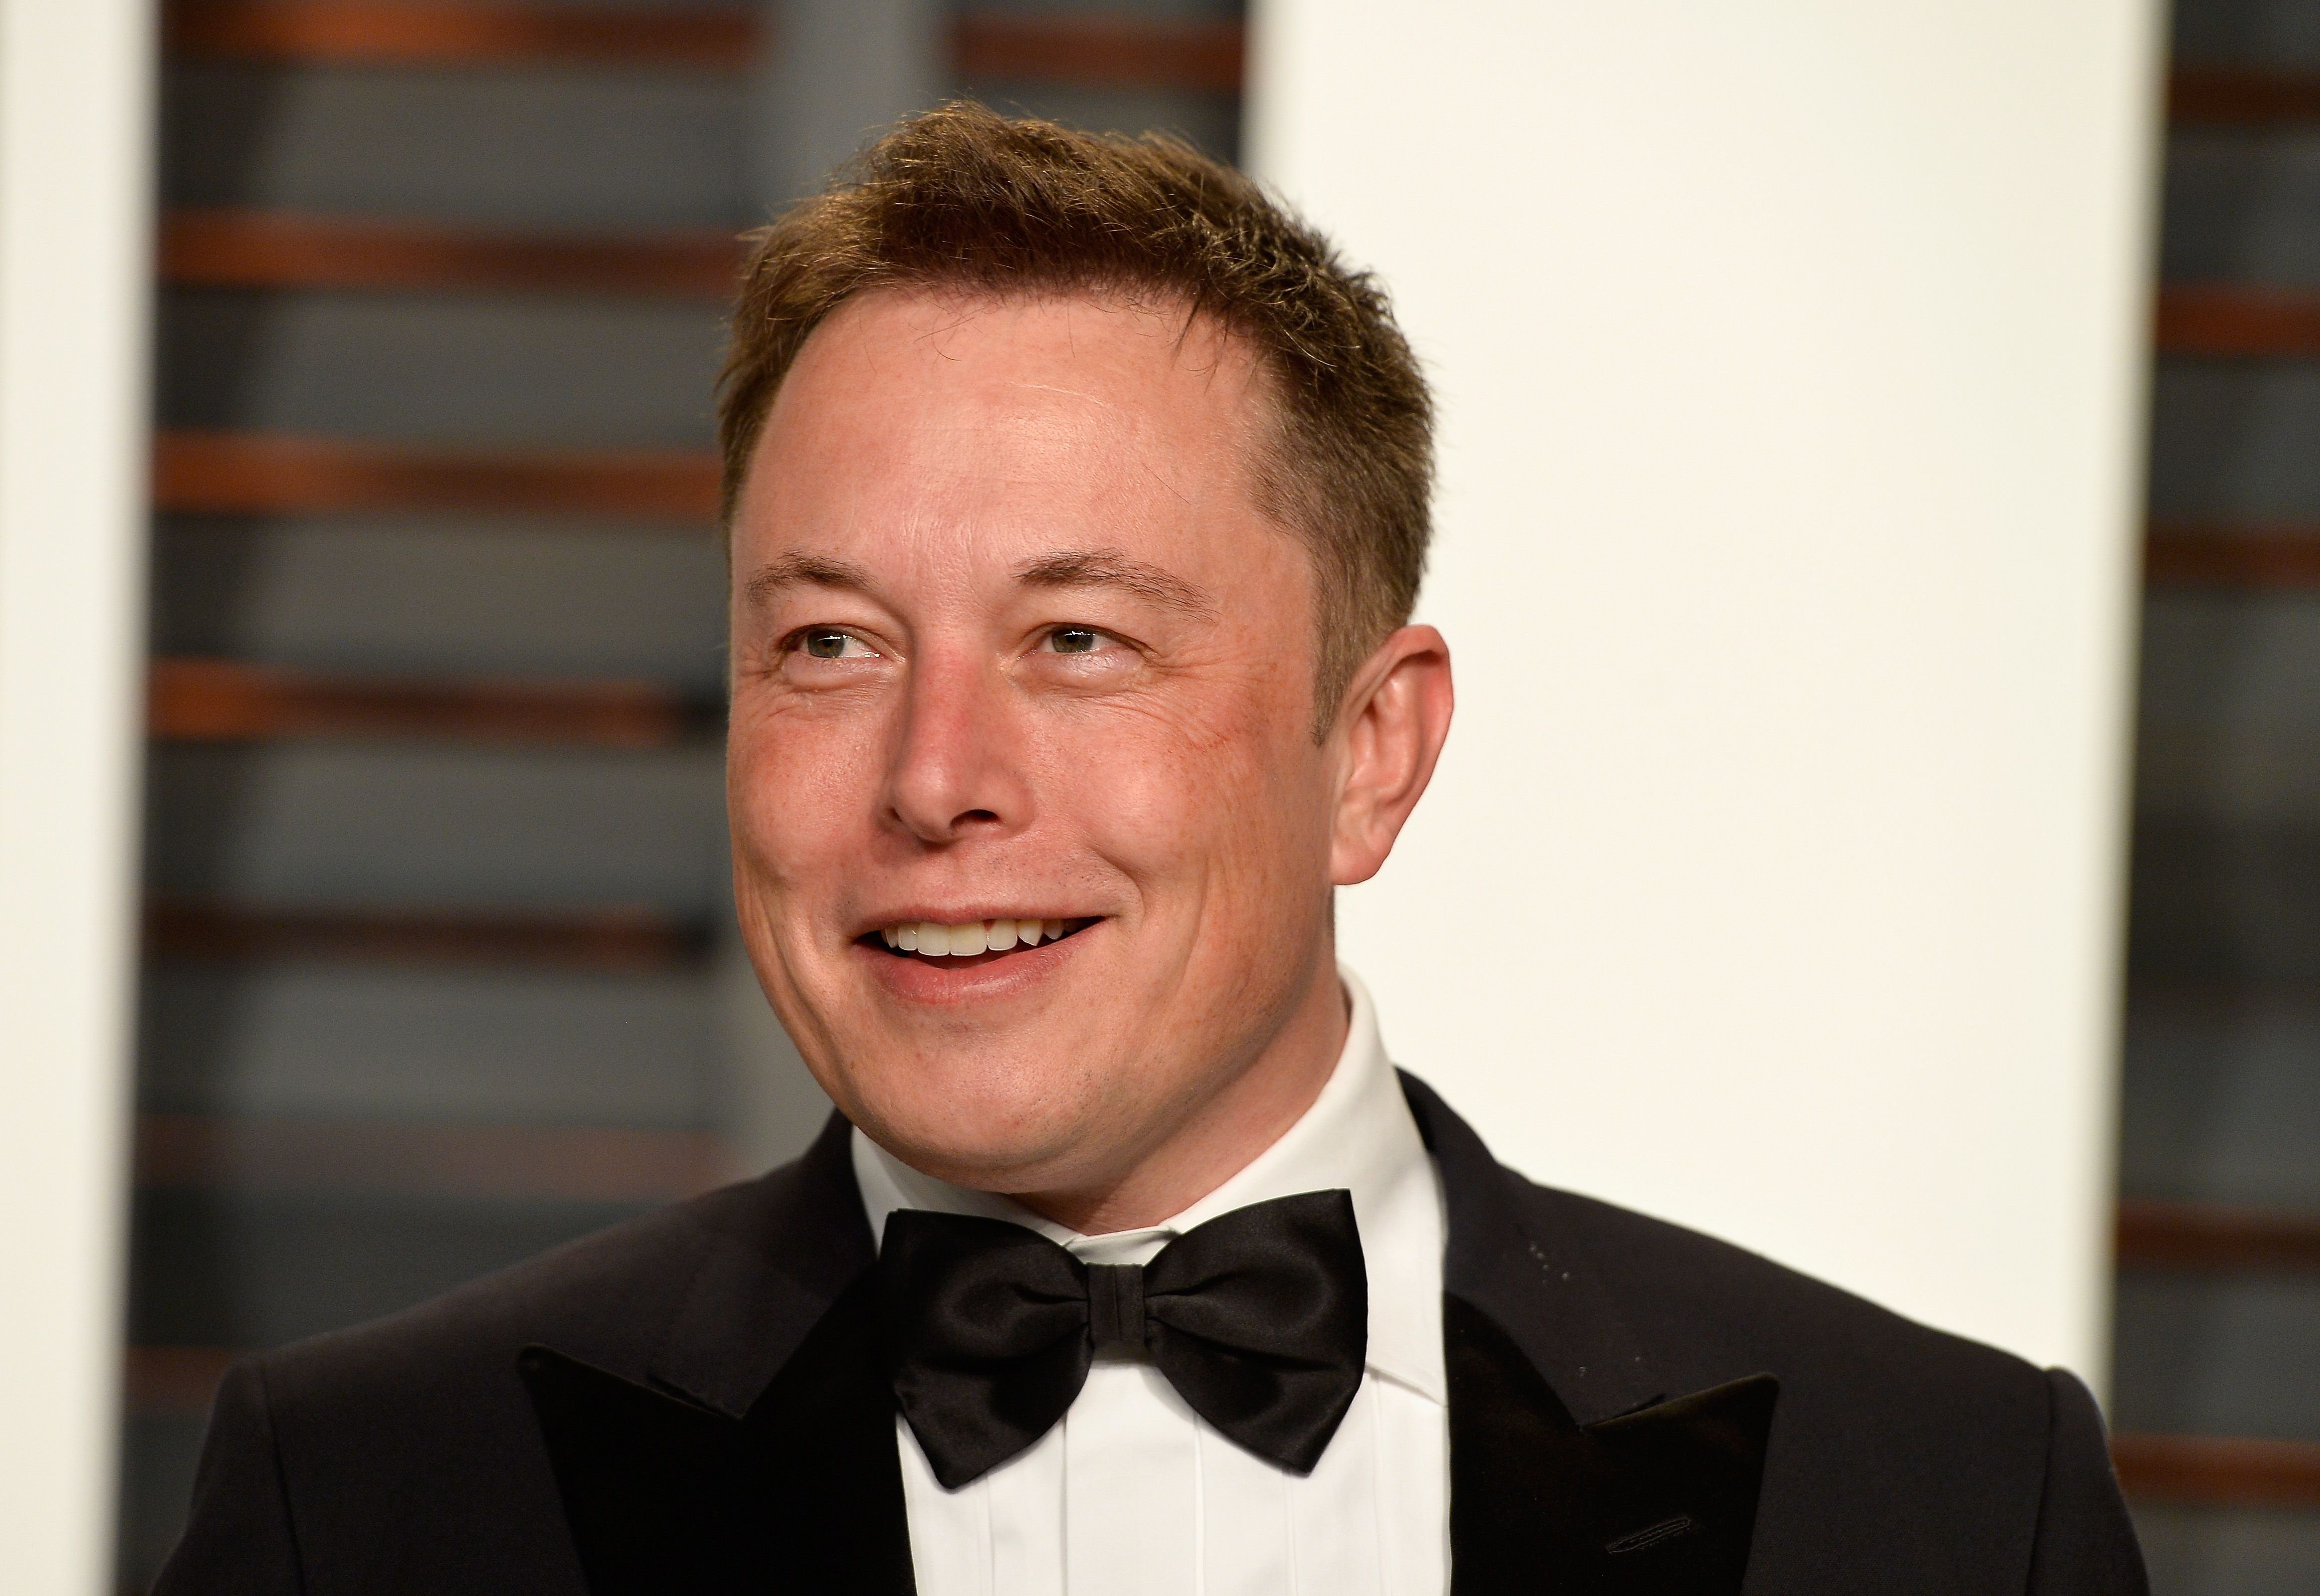 Elon Musk at the Vanity Fair Oscar Party on February 22, 2015, in Beverly Hills, California | Photo: Getty Images